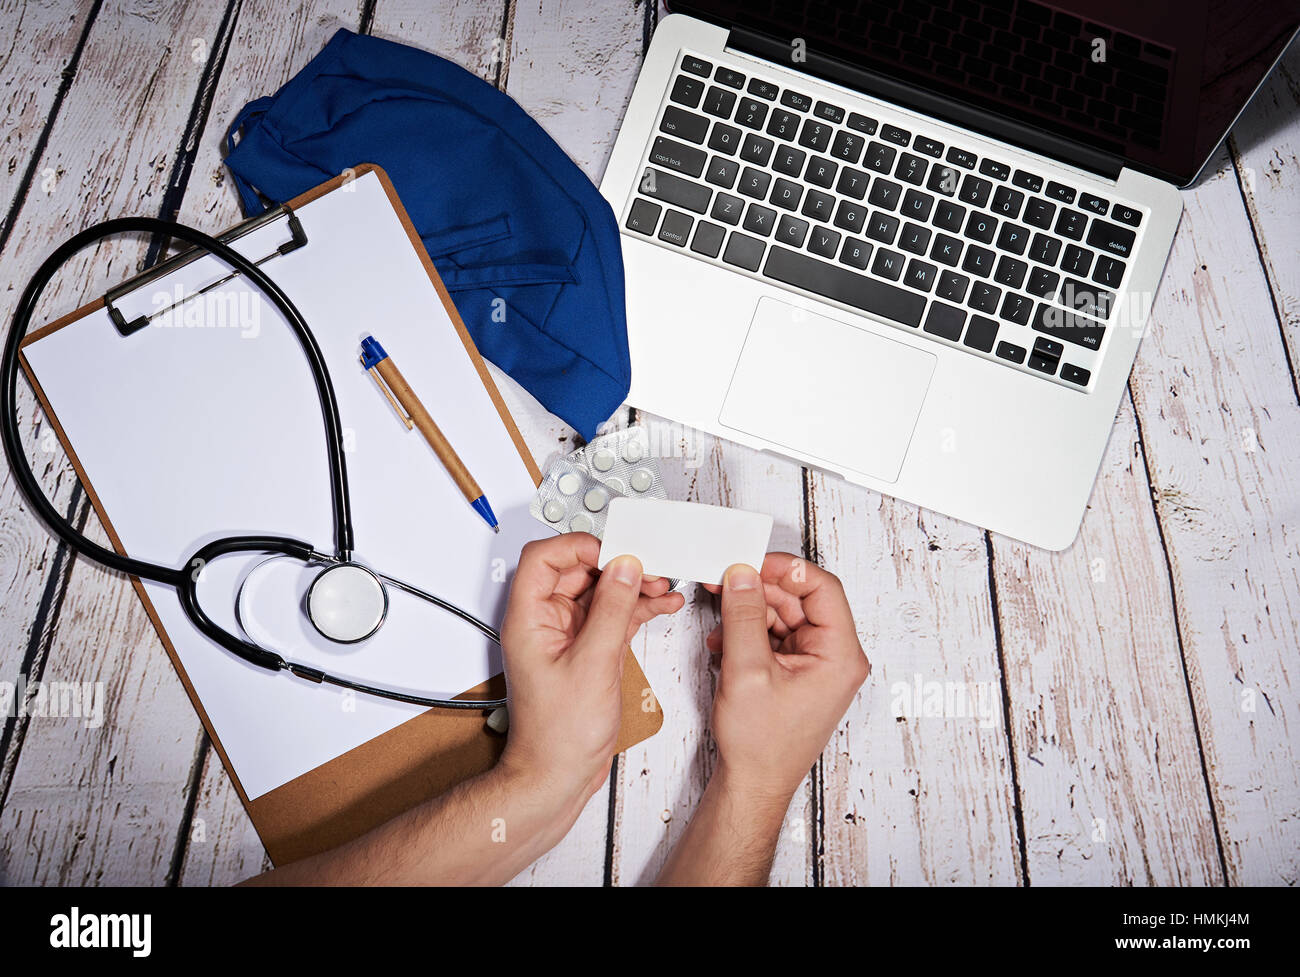 charging for medical service via credit card online Stock Photo